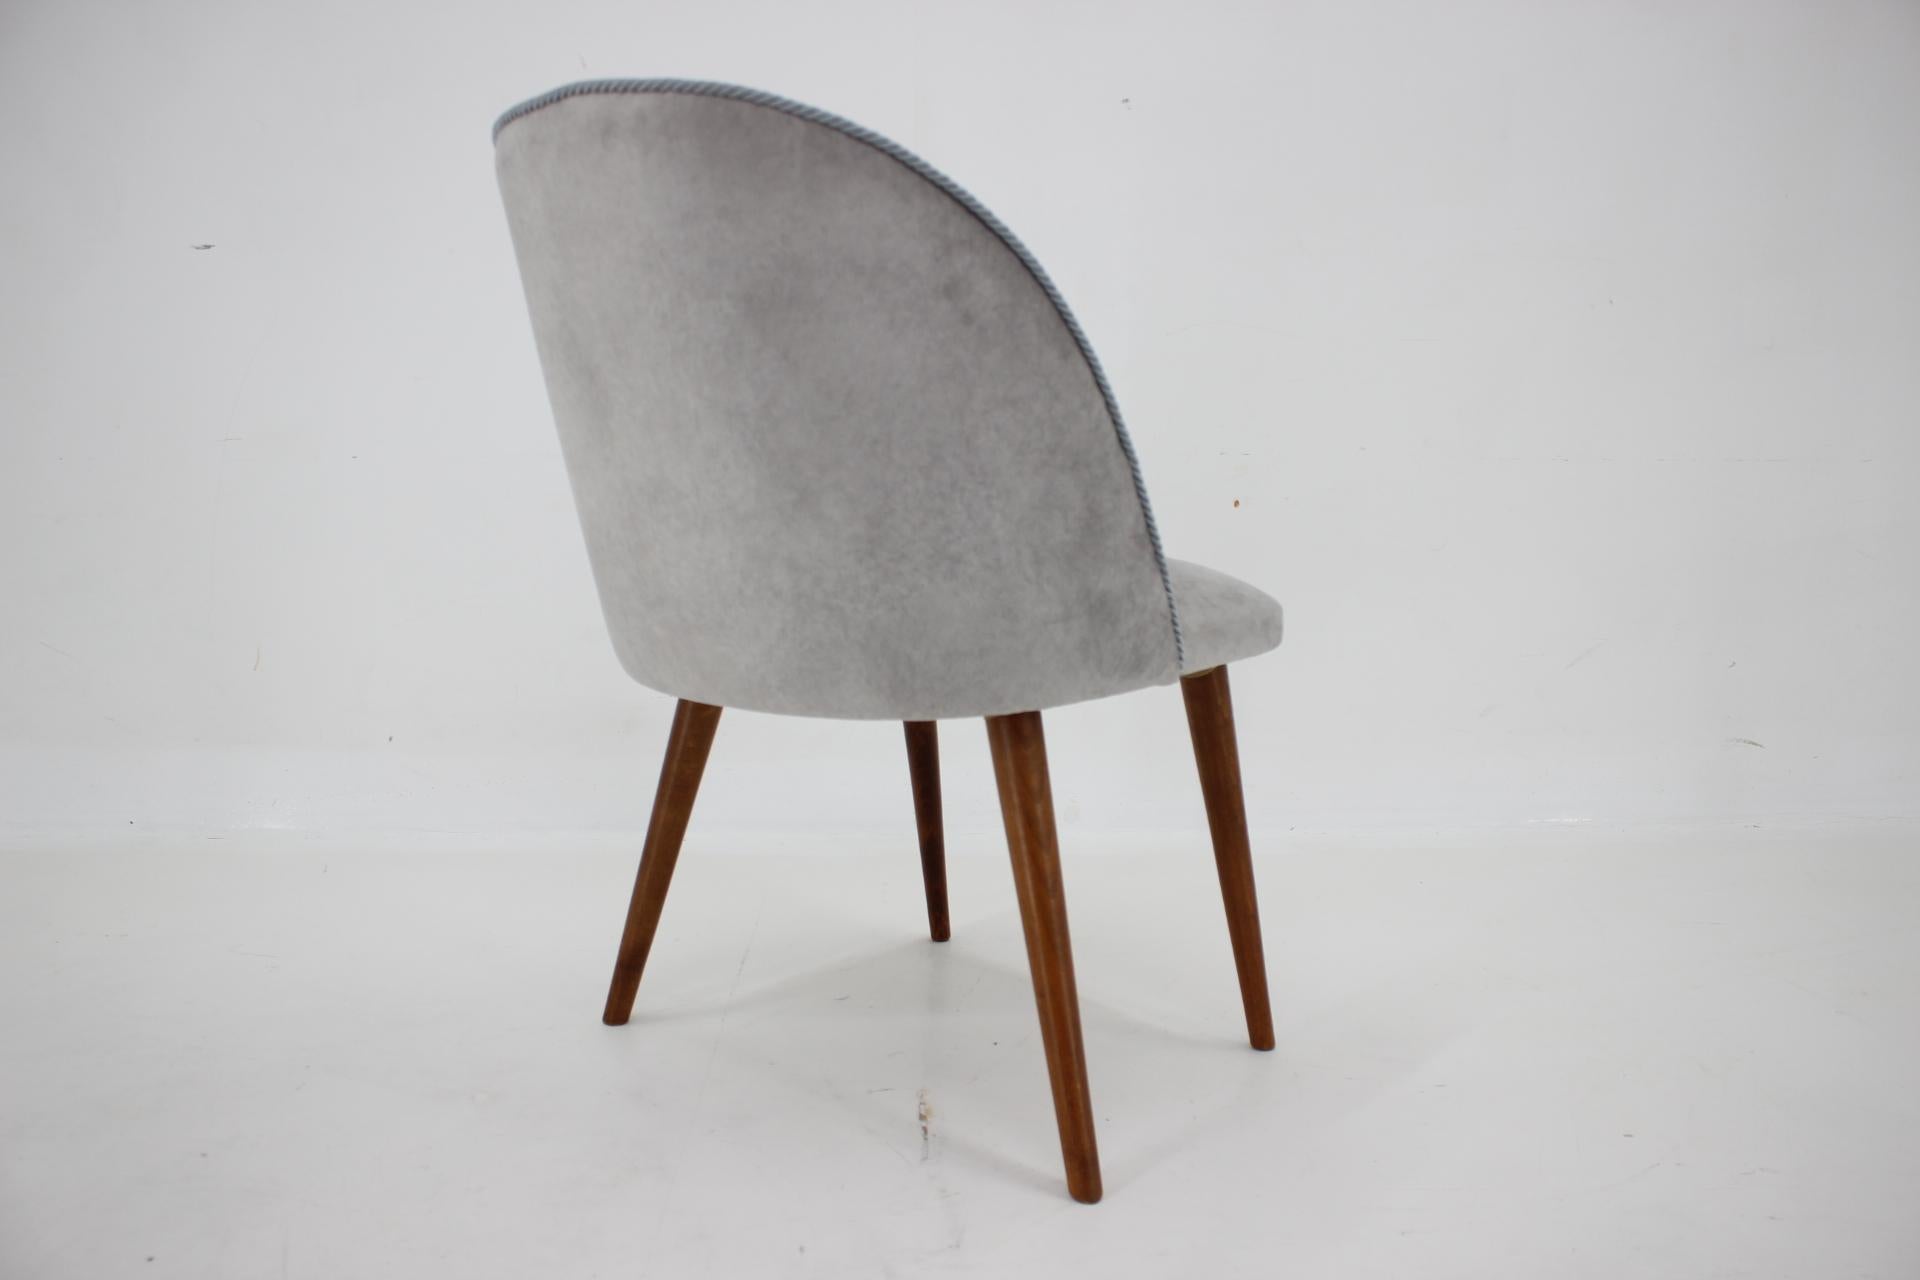 - newly upholstered 
- refurbished wooden legs 